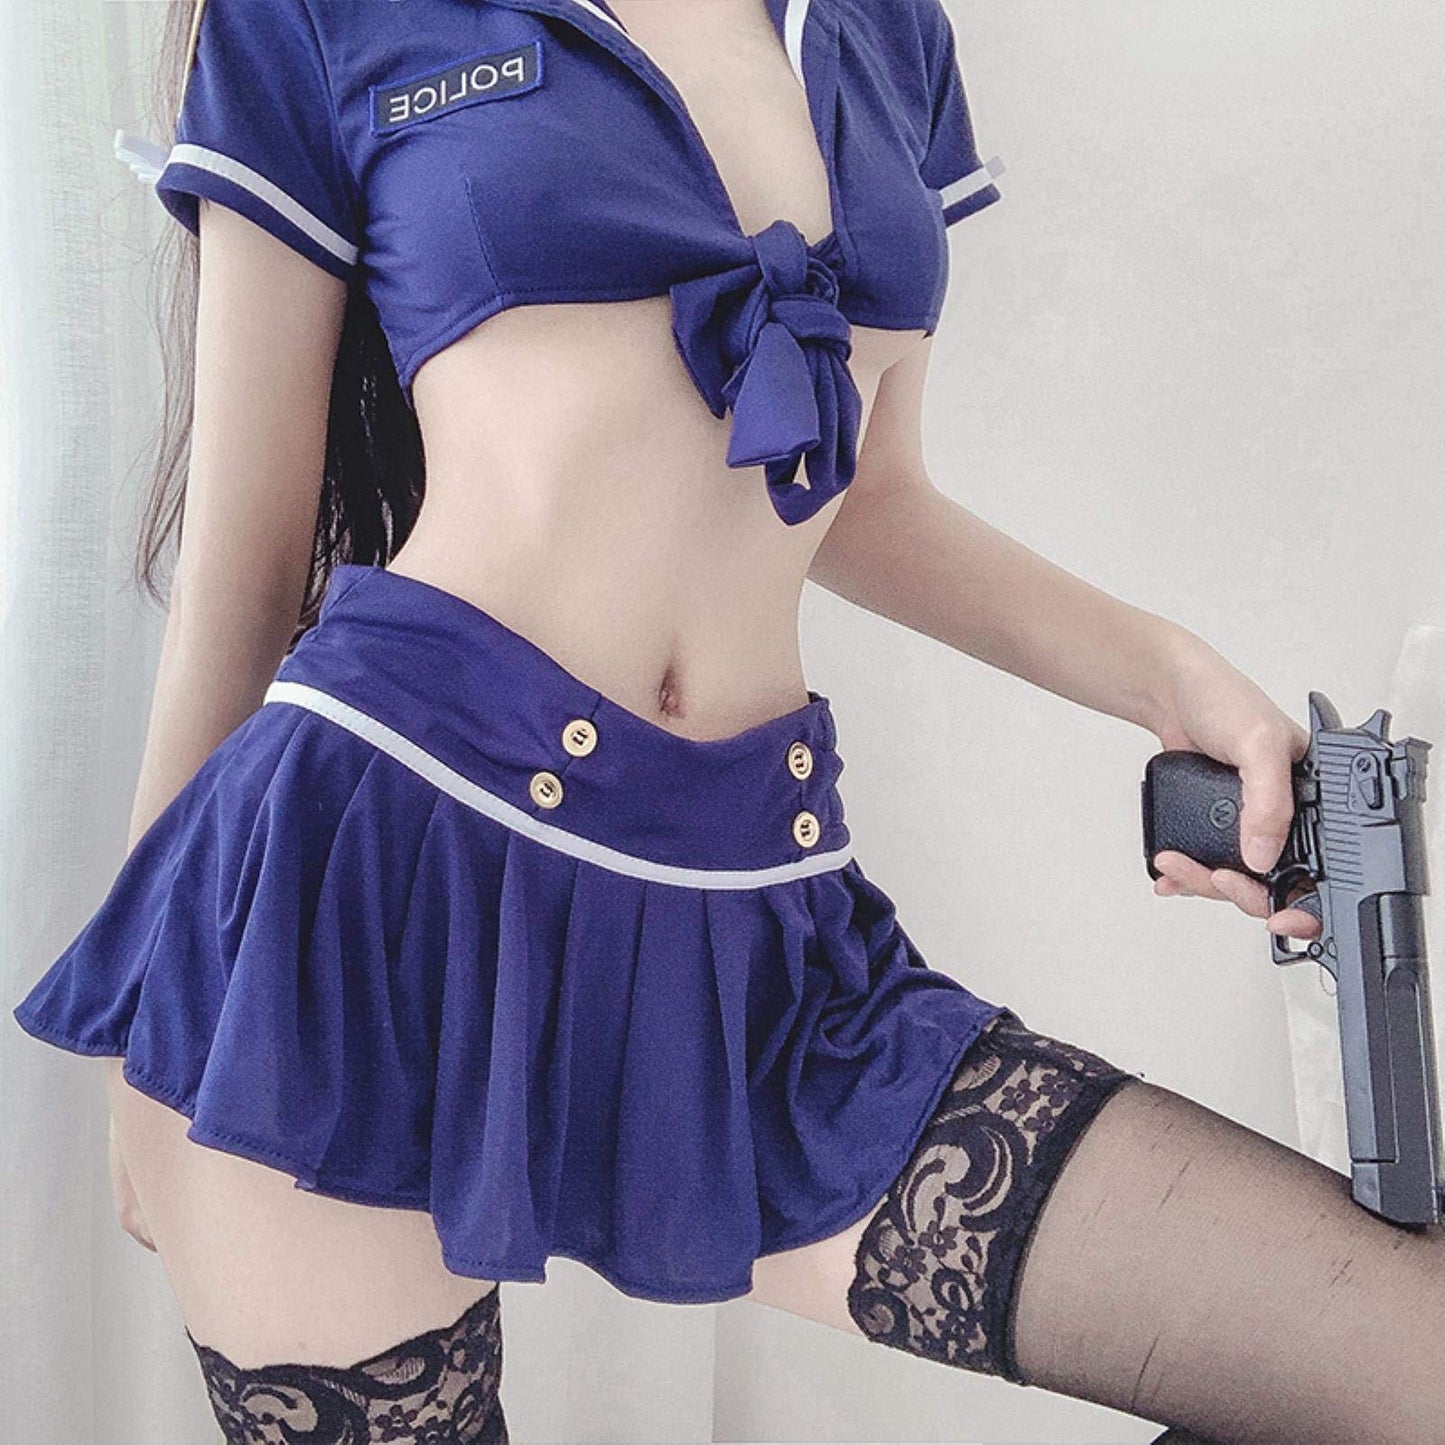 Police Sexy Cosplay Costumes Cute Kawaii Lingerie Set SCD0064